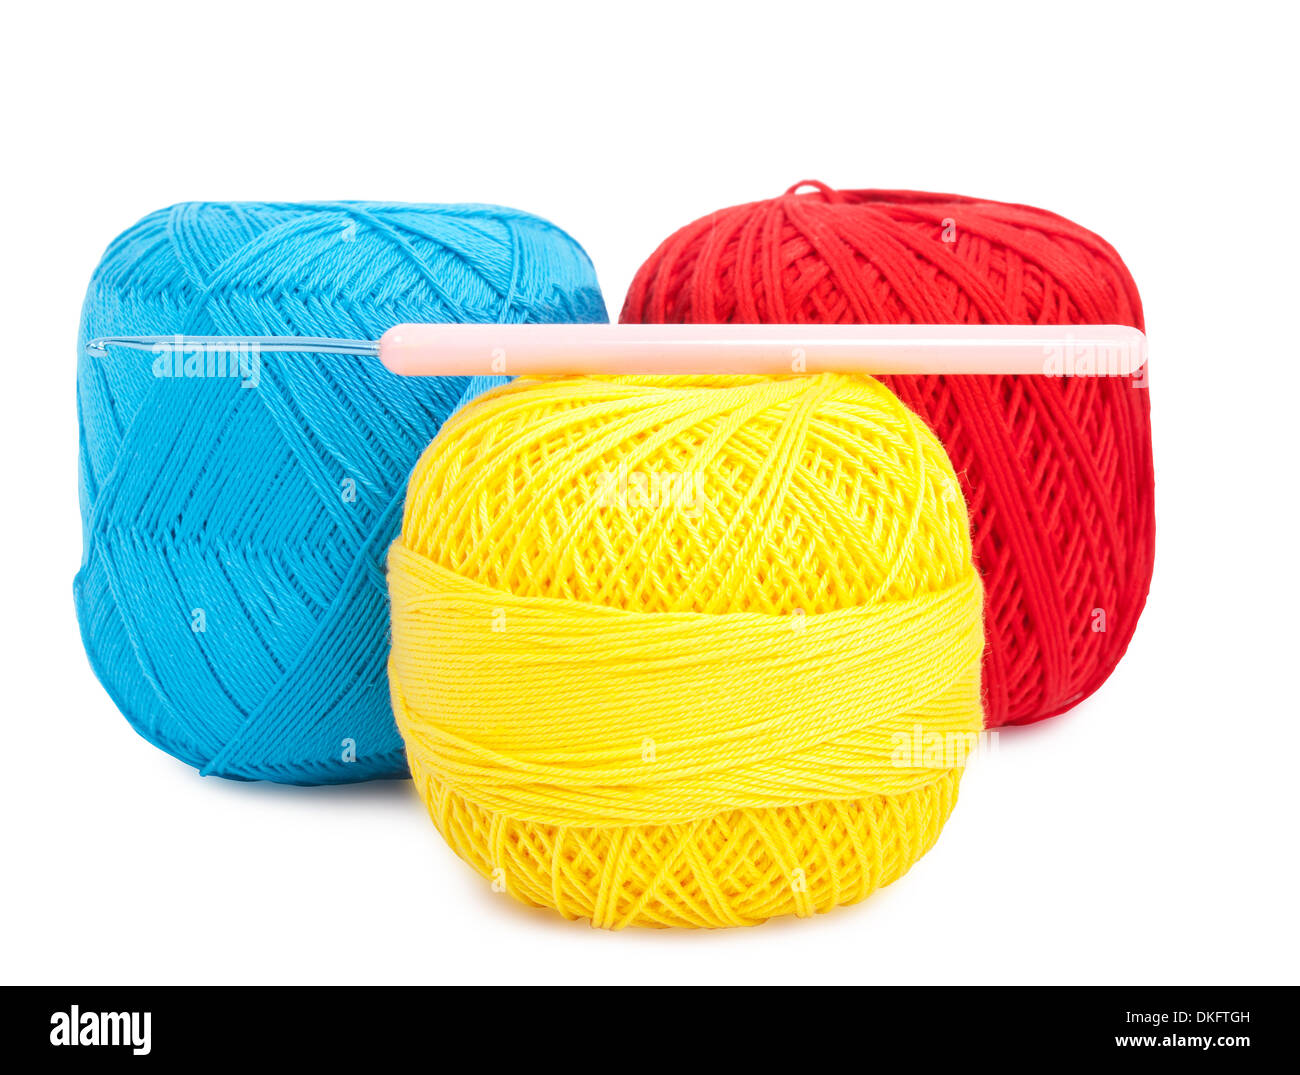 blue, yellow and red ball of yarn with hook for knitting Stock Photo